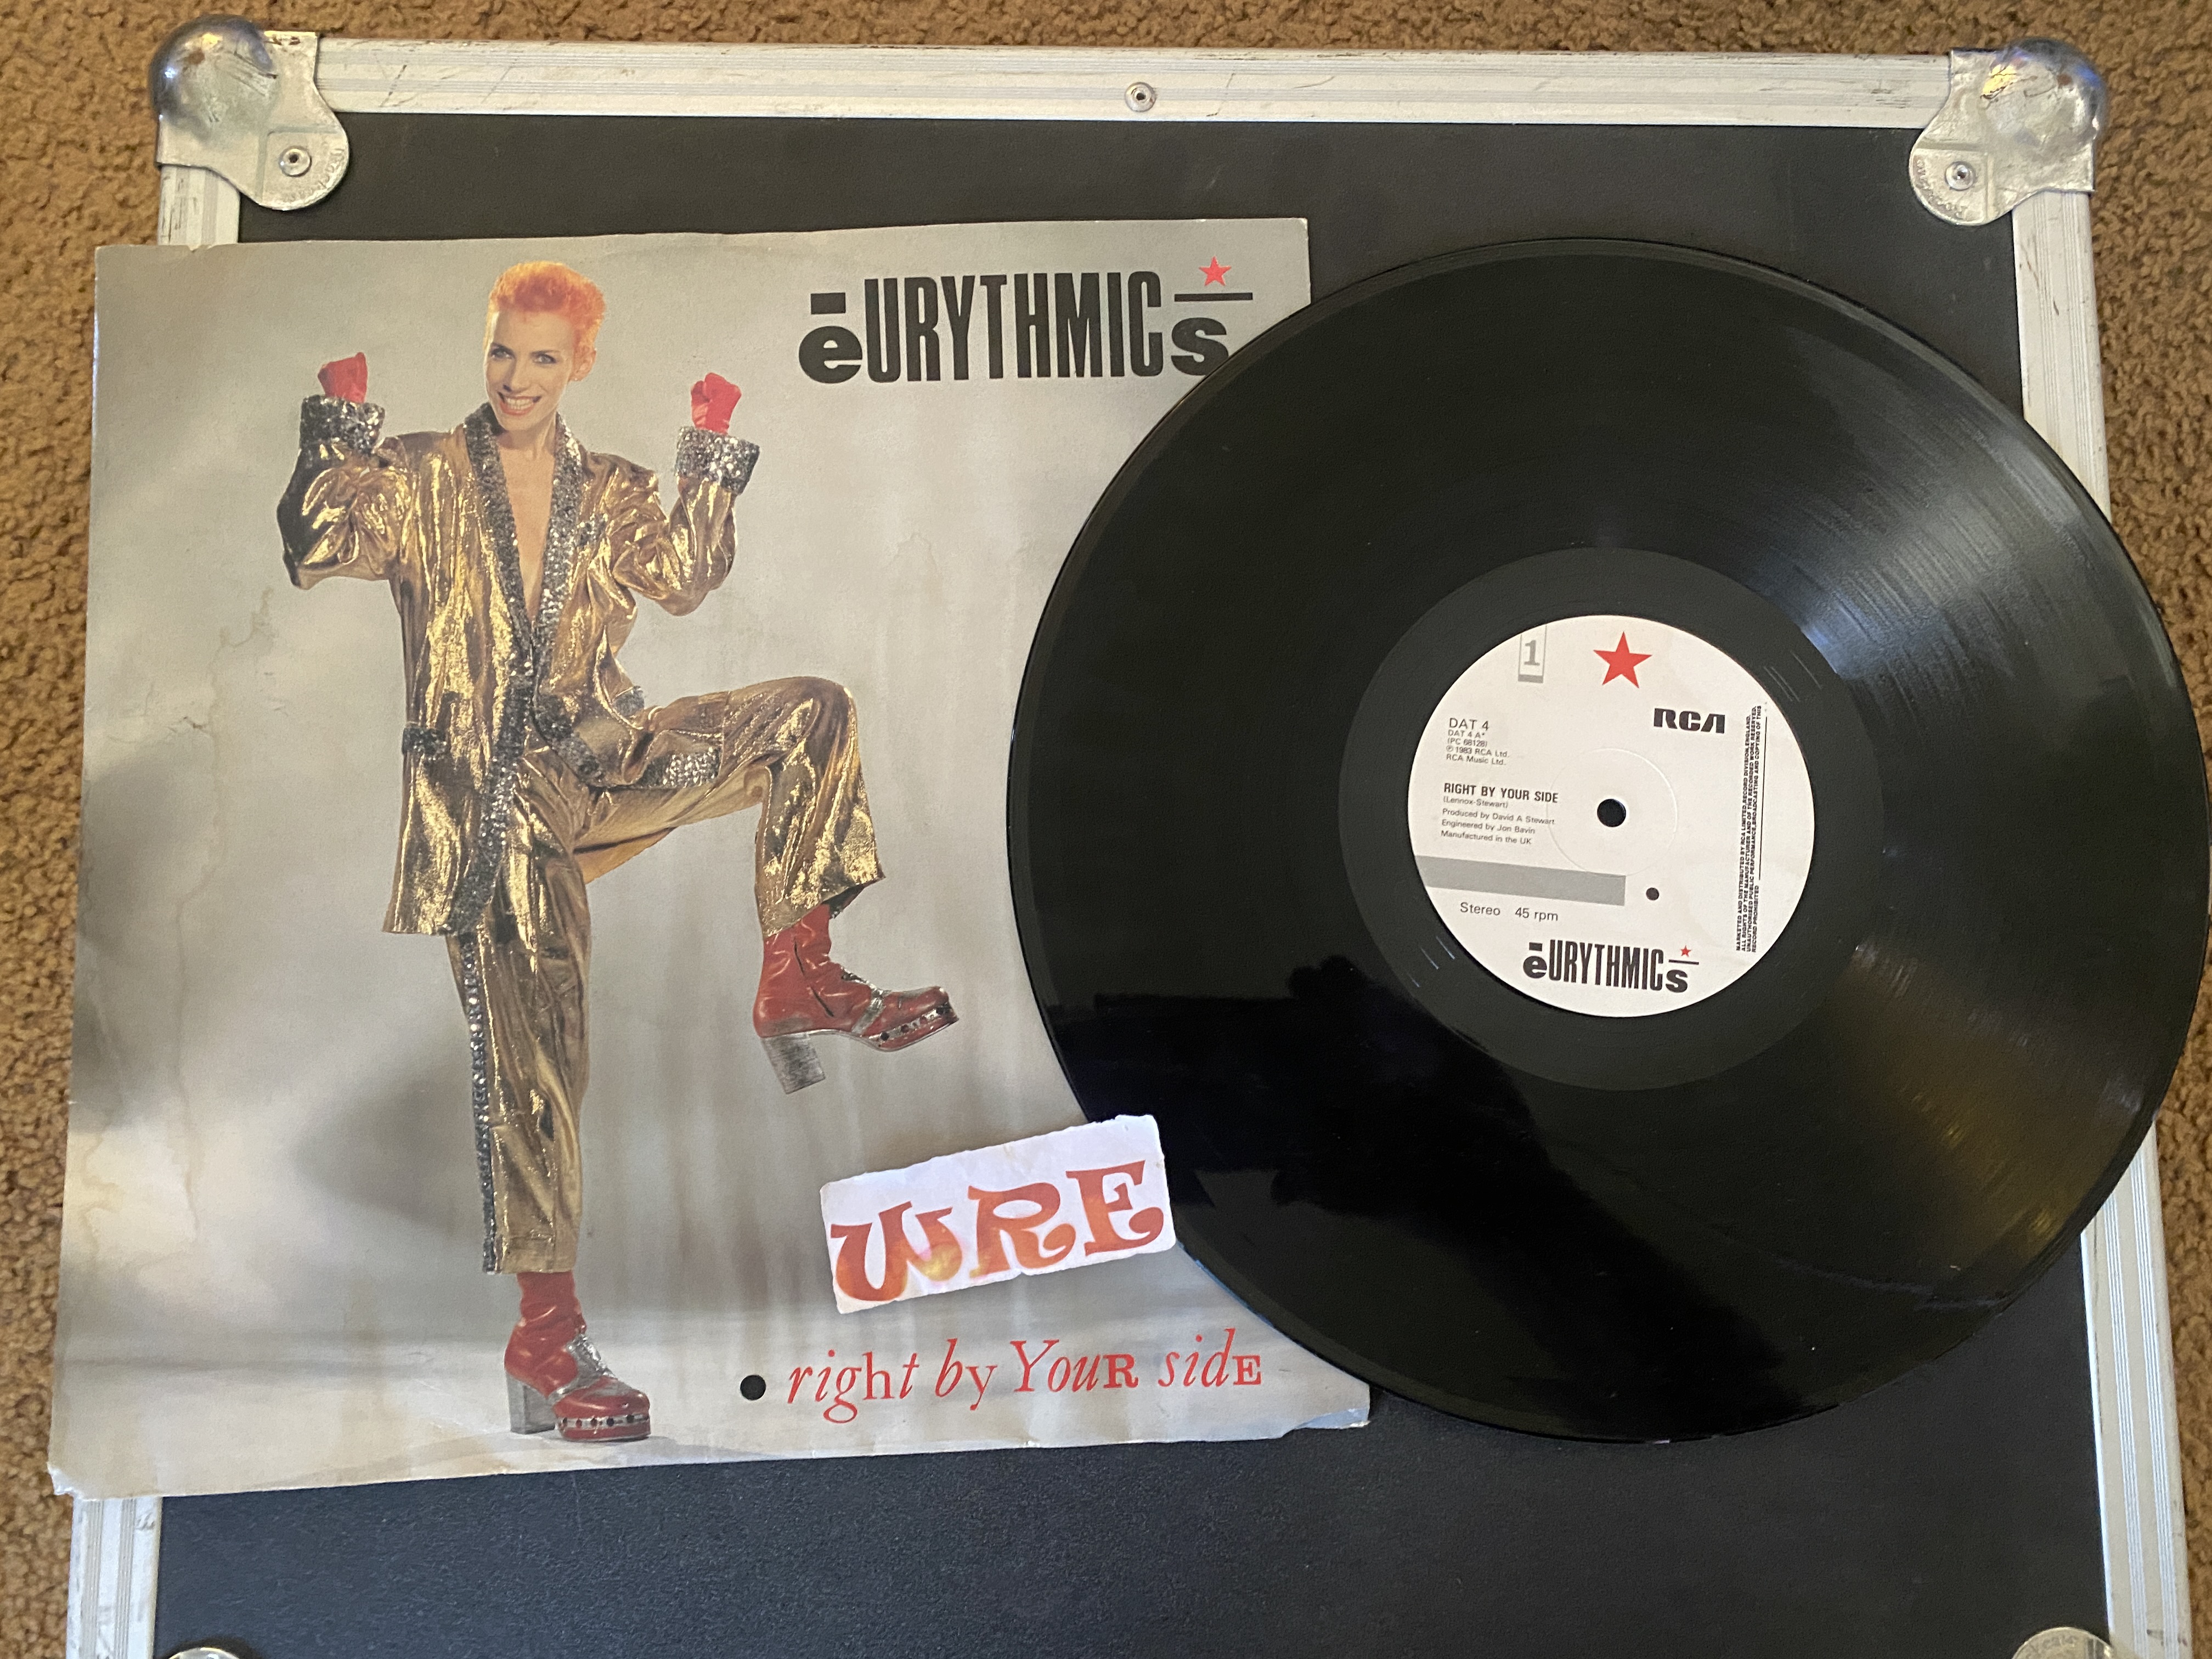 Eurythmics-Right By Your Side-(PC 68128)-VINYL-FLAC-1983-WRE Download